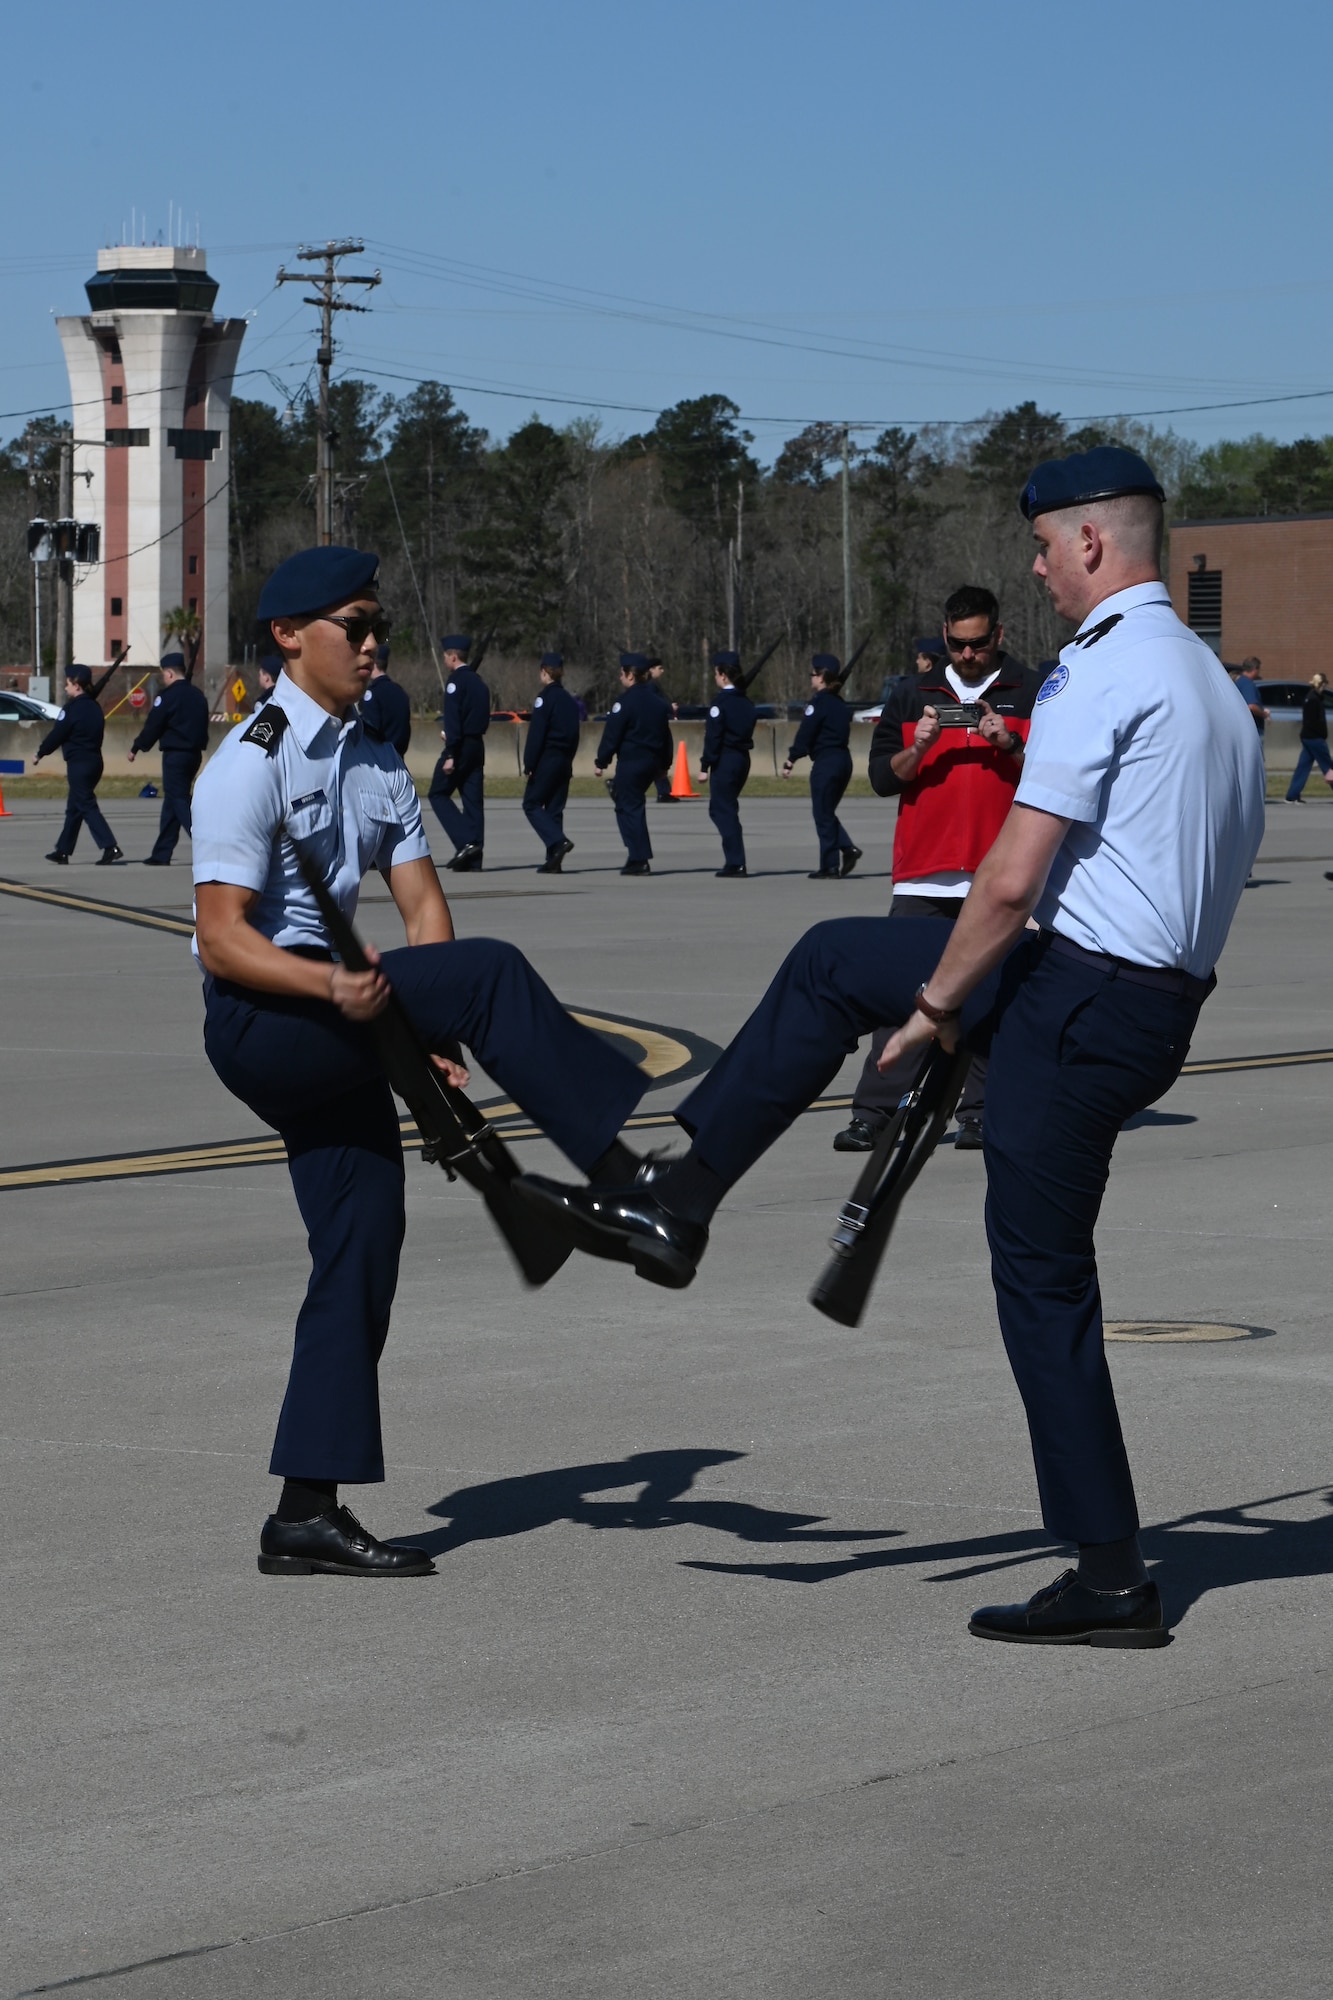 The Beaufort High School ‘Fancy Duet Armed’ team from Beaufort, South Carolina competes during the annual Top Gun Drill Meet at McEntire Joint National Guard Base, South Carolina, March 26, 2022. High School Junior Reserve Officers Training Corps cadets from twenty high schools from across the state competed in twelve drill and ceremony events sponsored by the South Carolina Air National Guard. (U.S. Air National Guard photo by Senior Master Sgt. Edward Snyder)